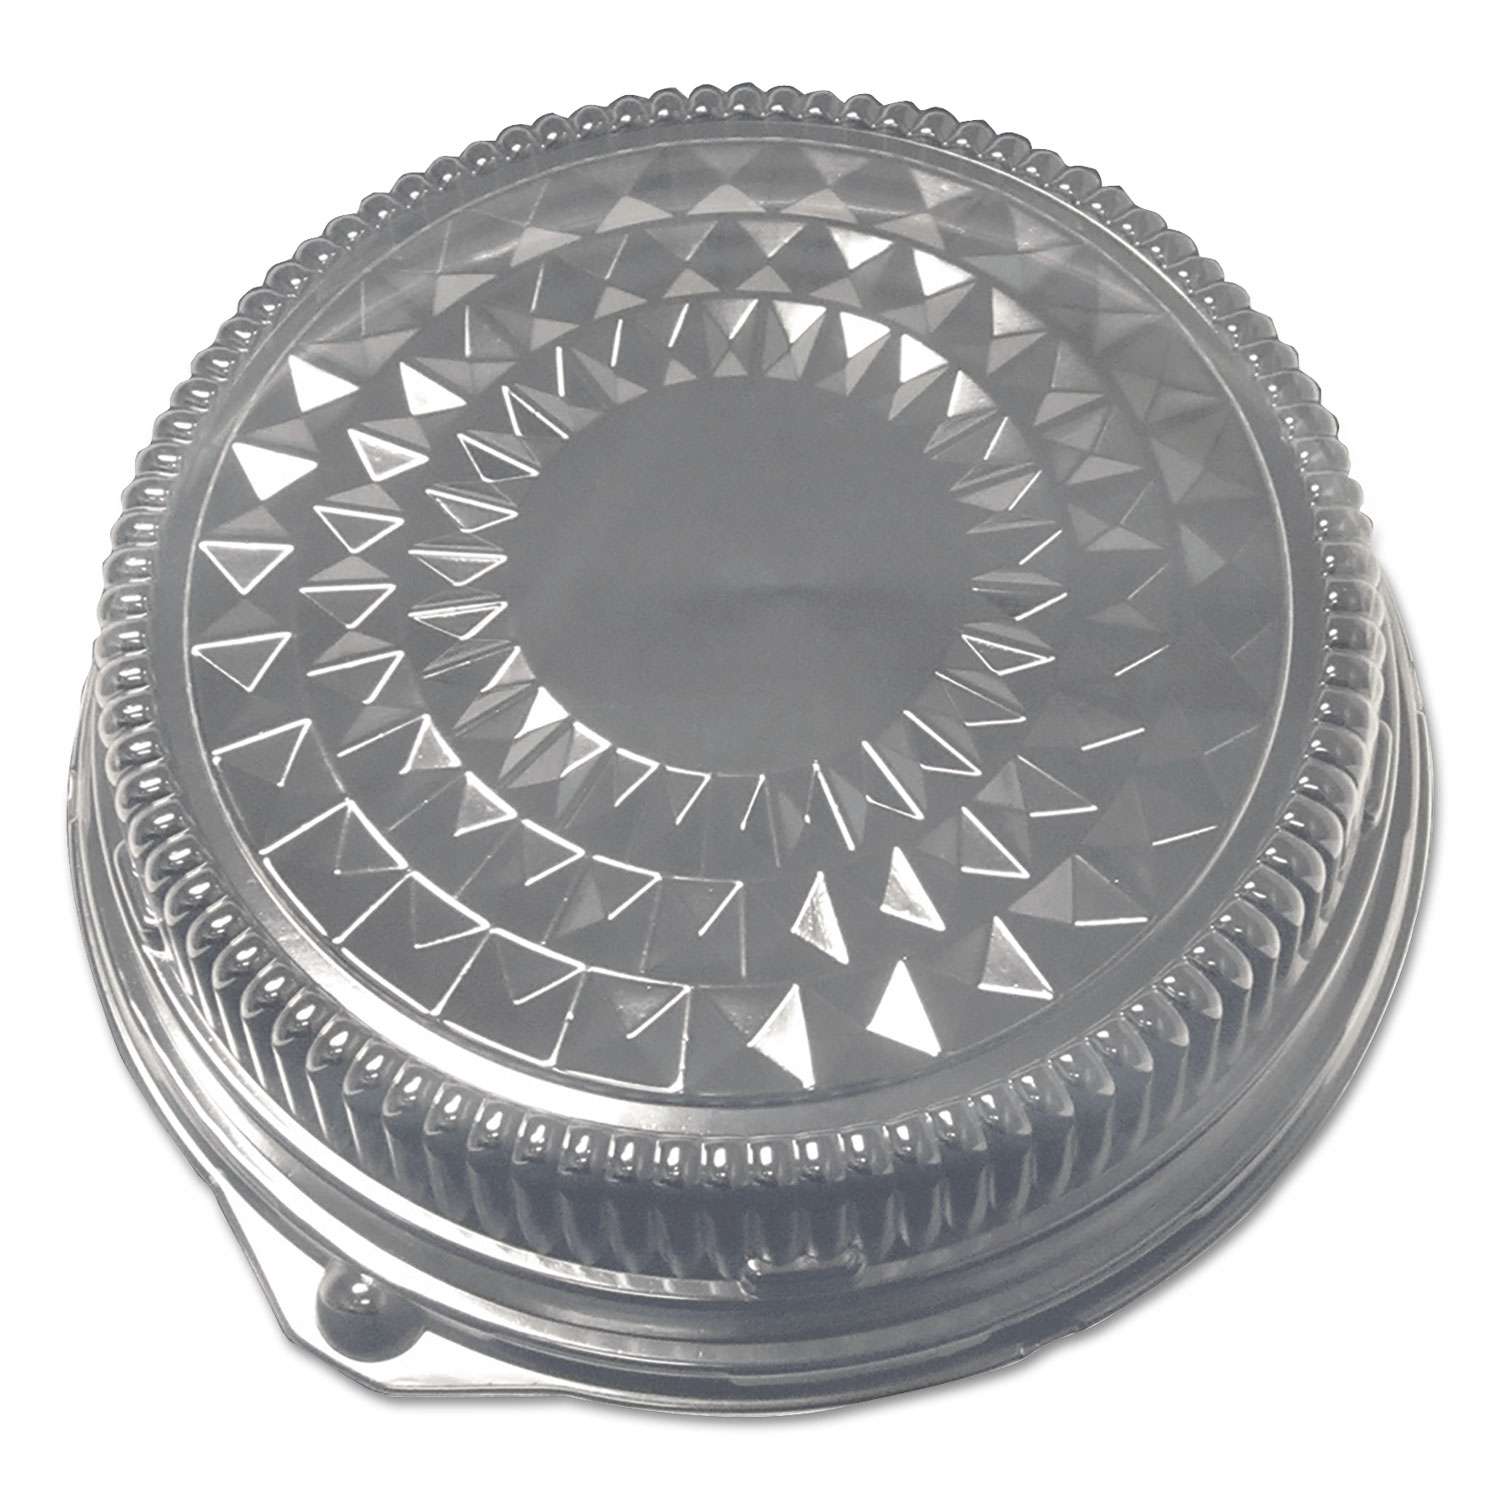  Durable Packaging 16DL Dome Lids for 16 Cater Trays, 50/Carton (DPK16DL) 